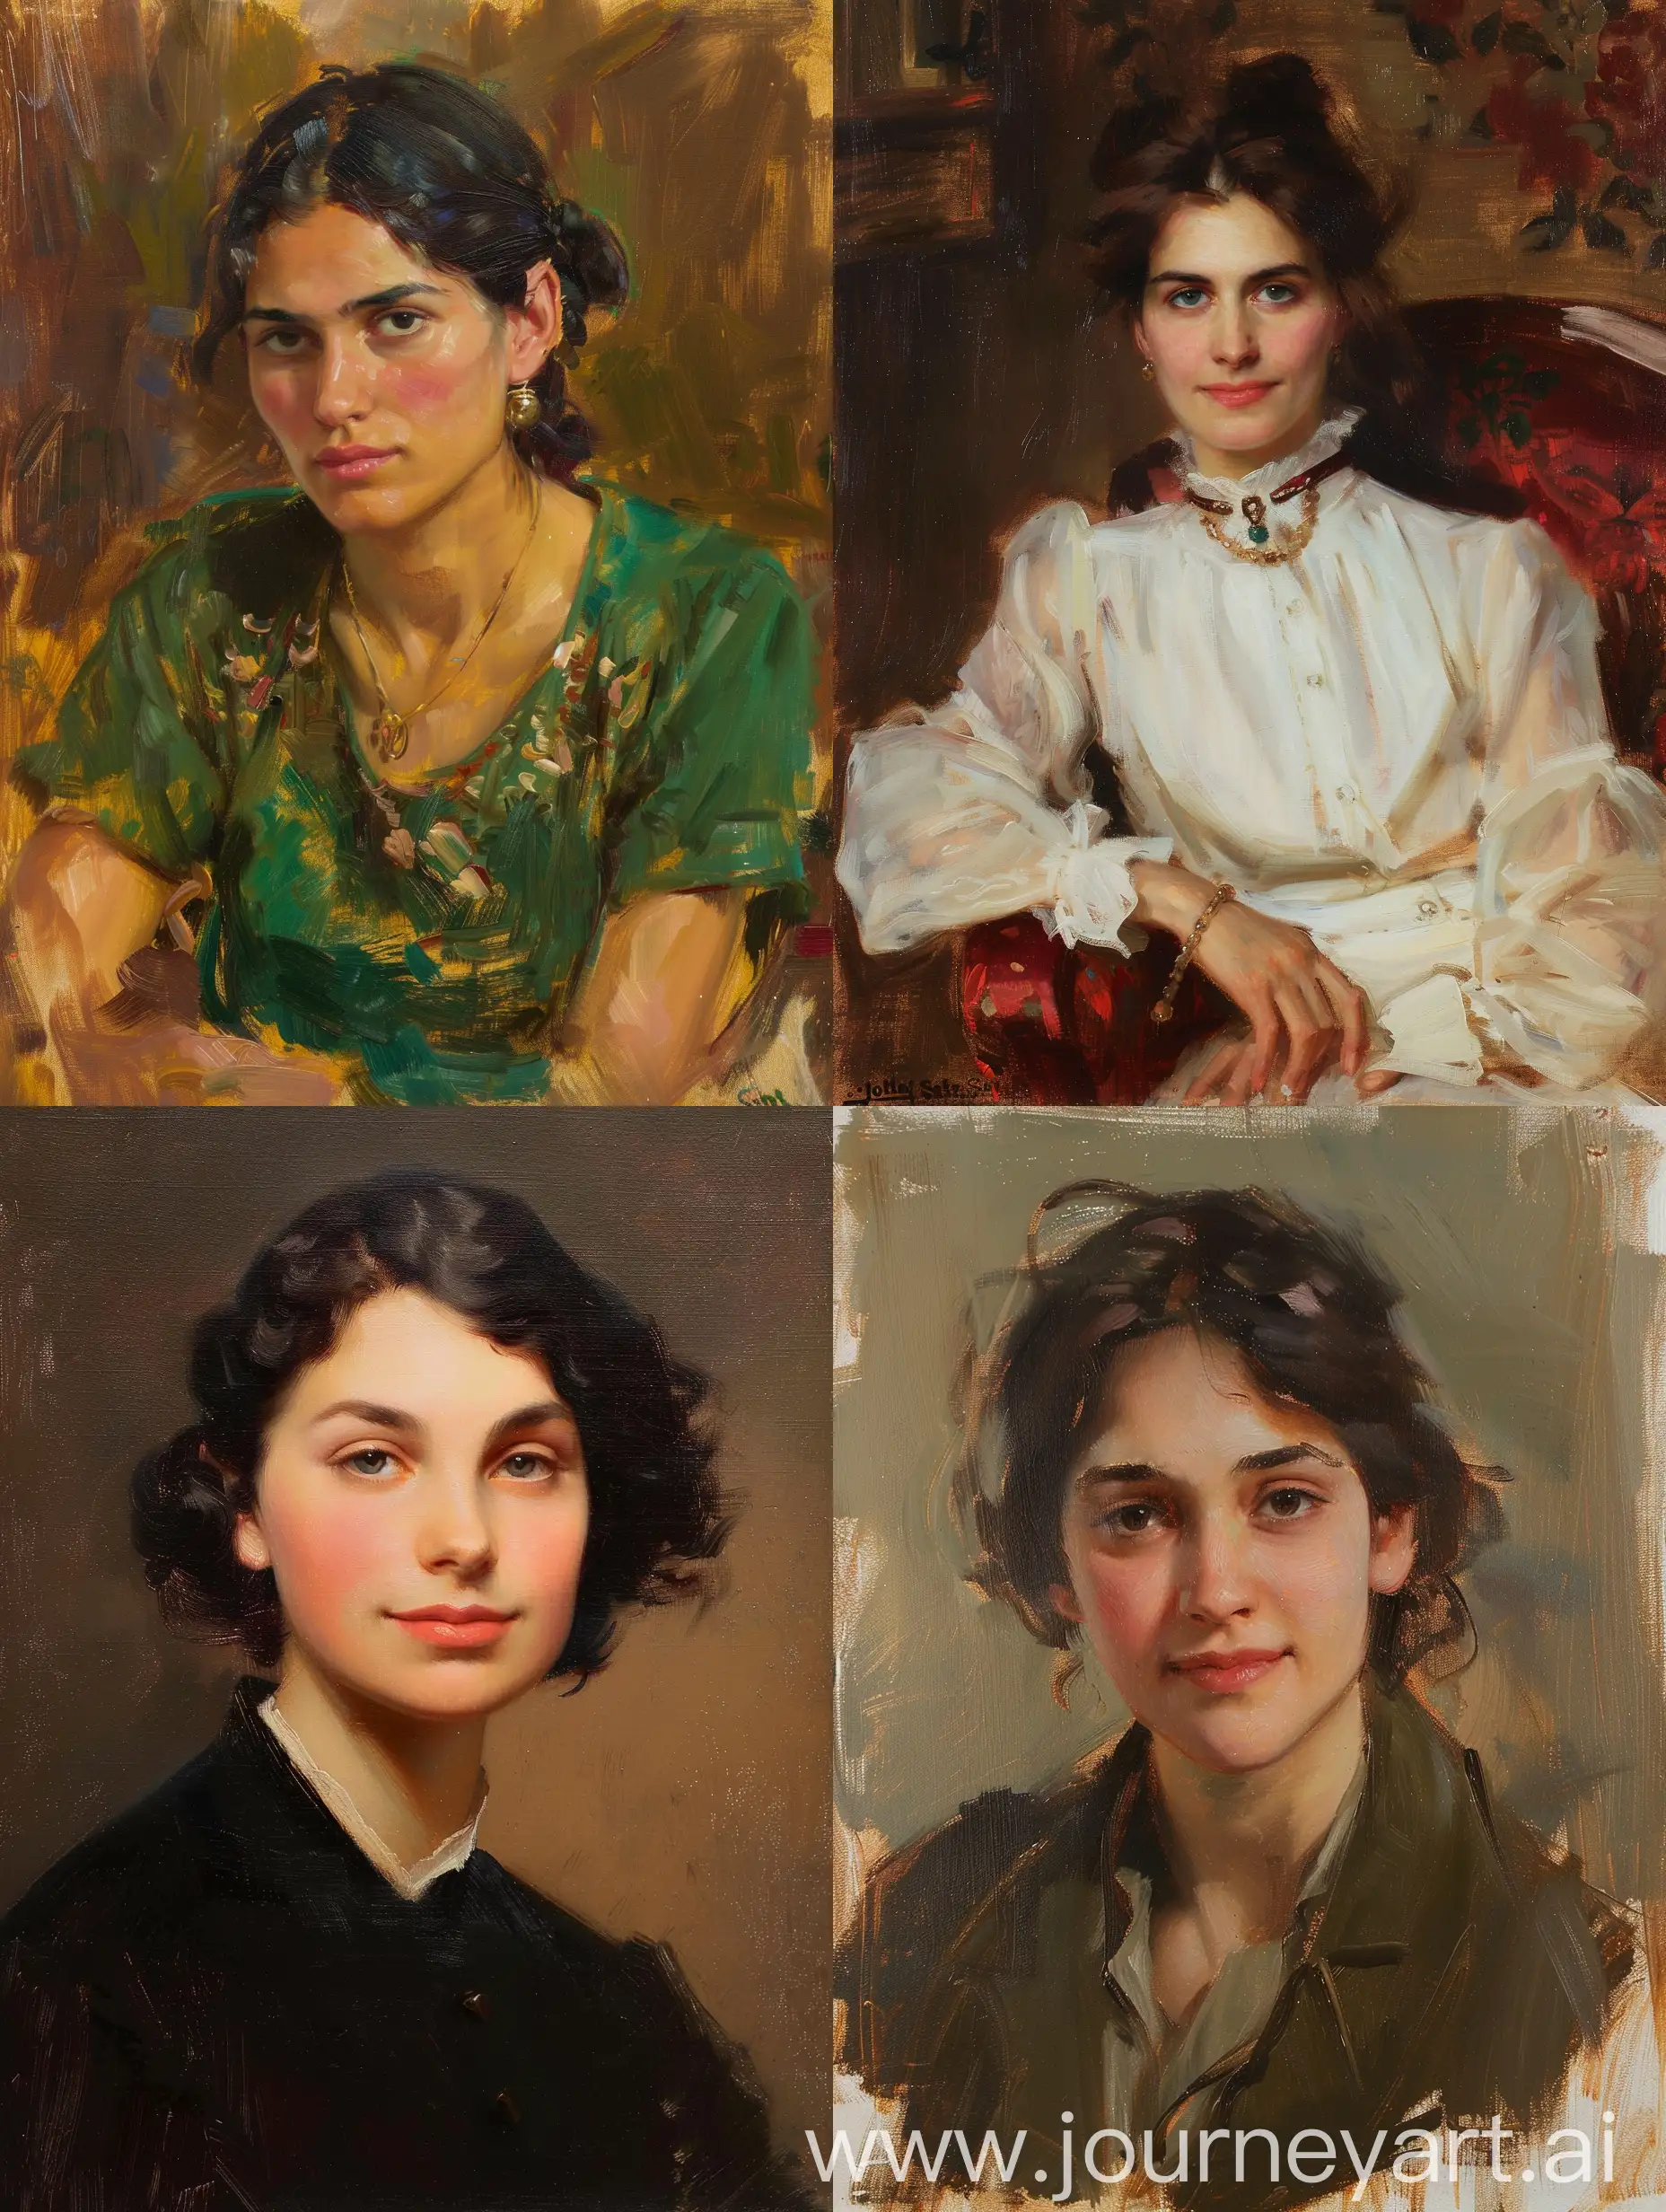 Painterly-Oil-Portrait-by-John-Singer-Sargent-Classic-Artistic-Expression